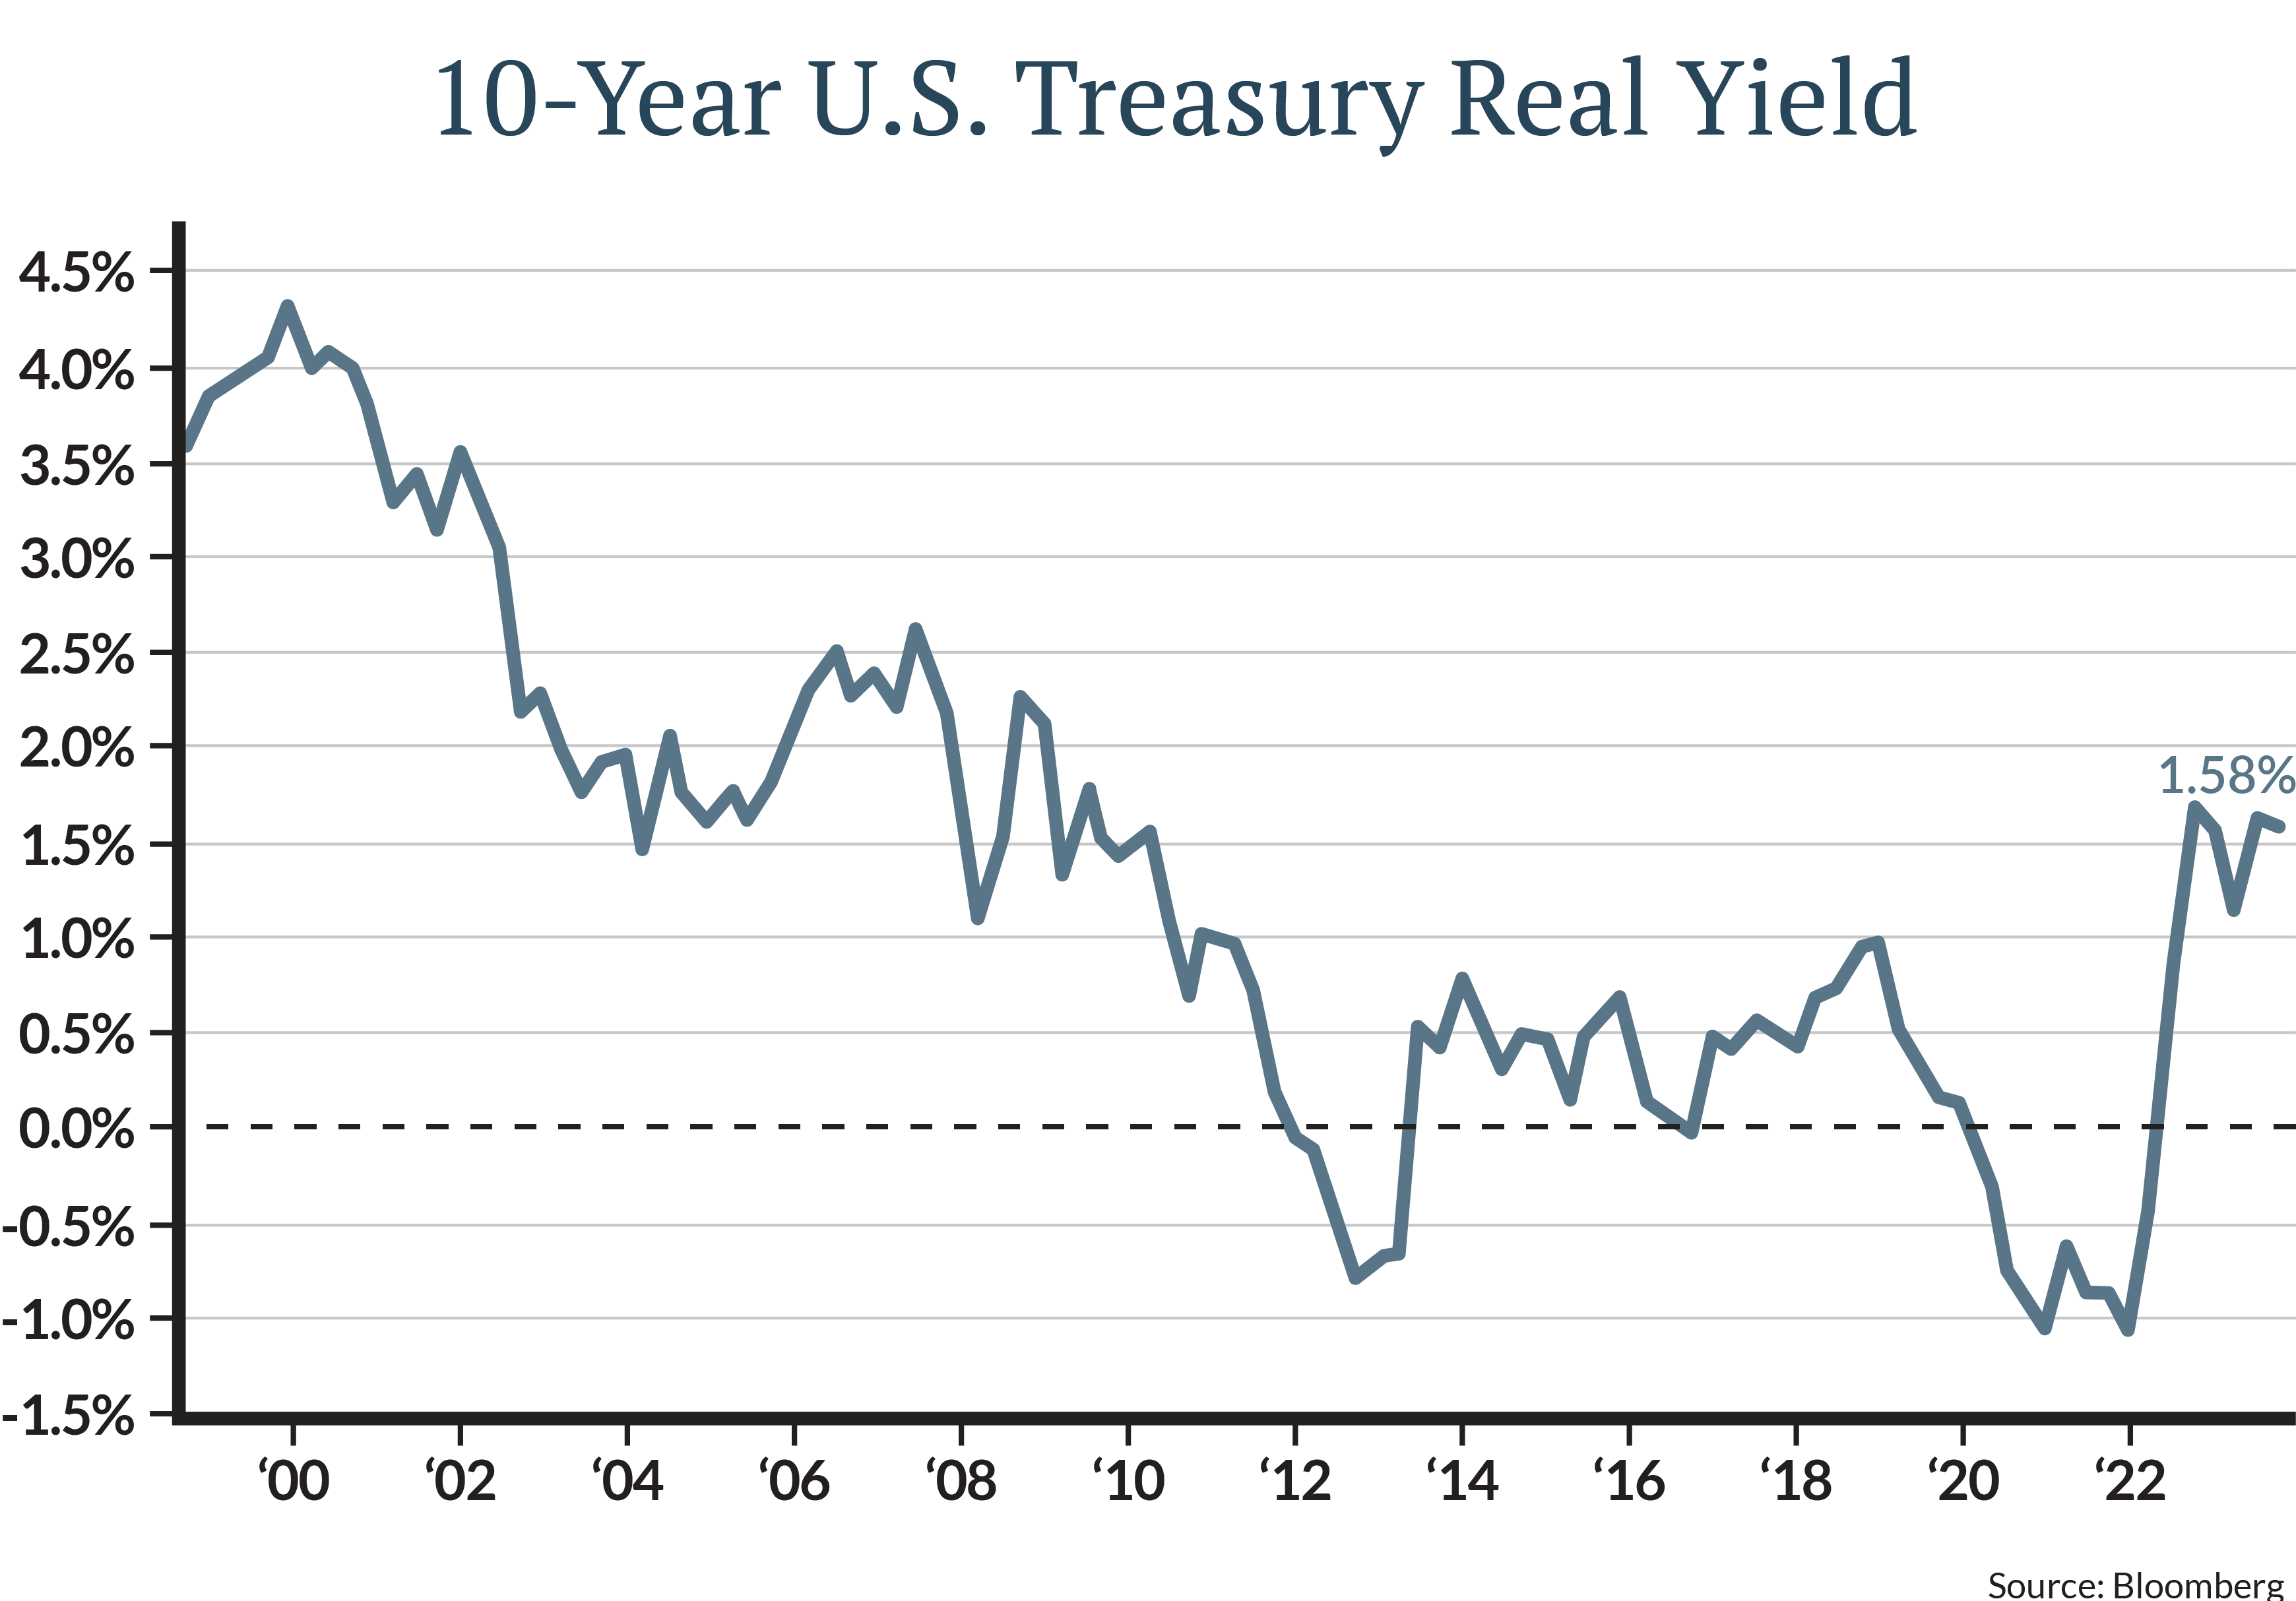 . In fact, the “real yield,” or the yield after adjusting for inflation, of the 10-Year Treasury today is the highest it has been since the Great Financial Crisis